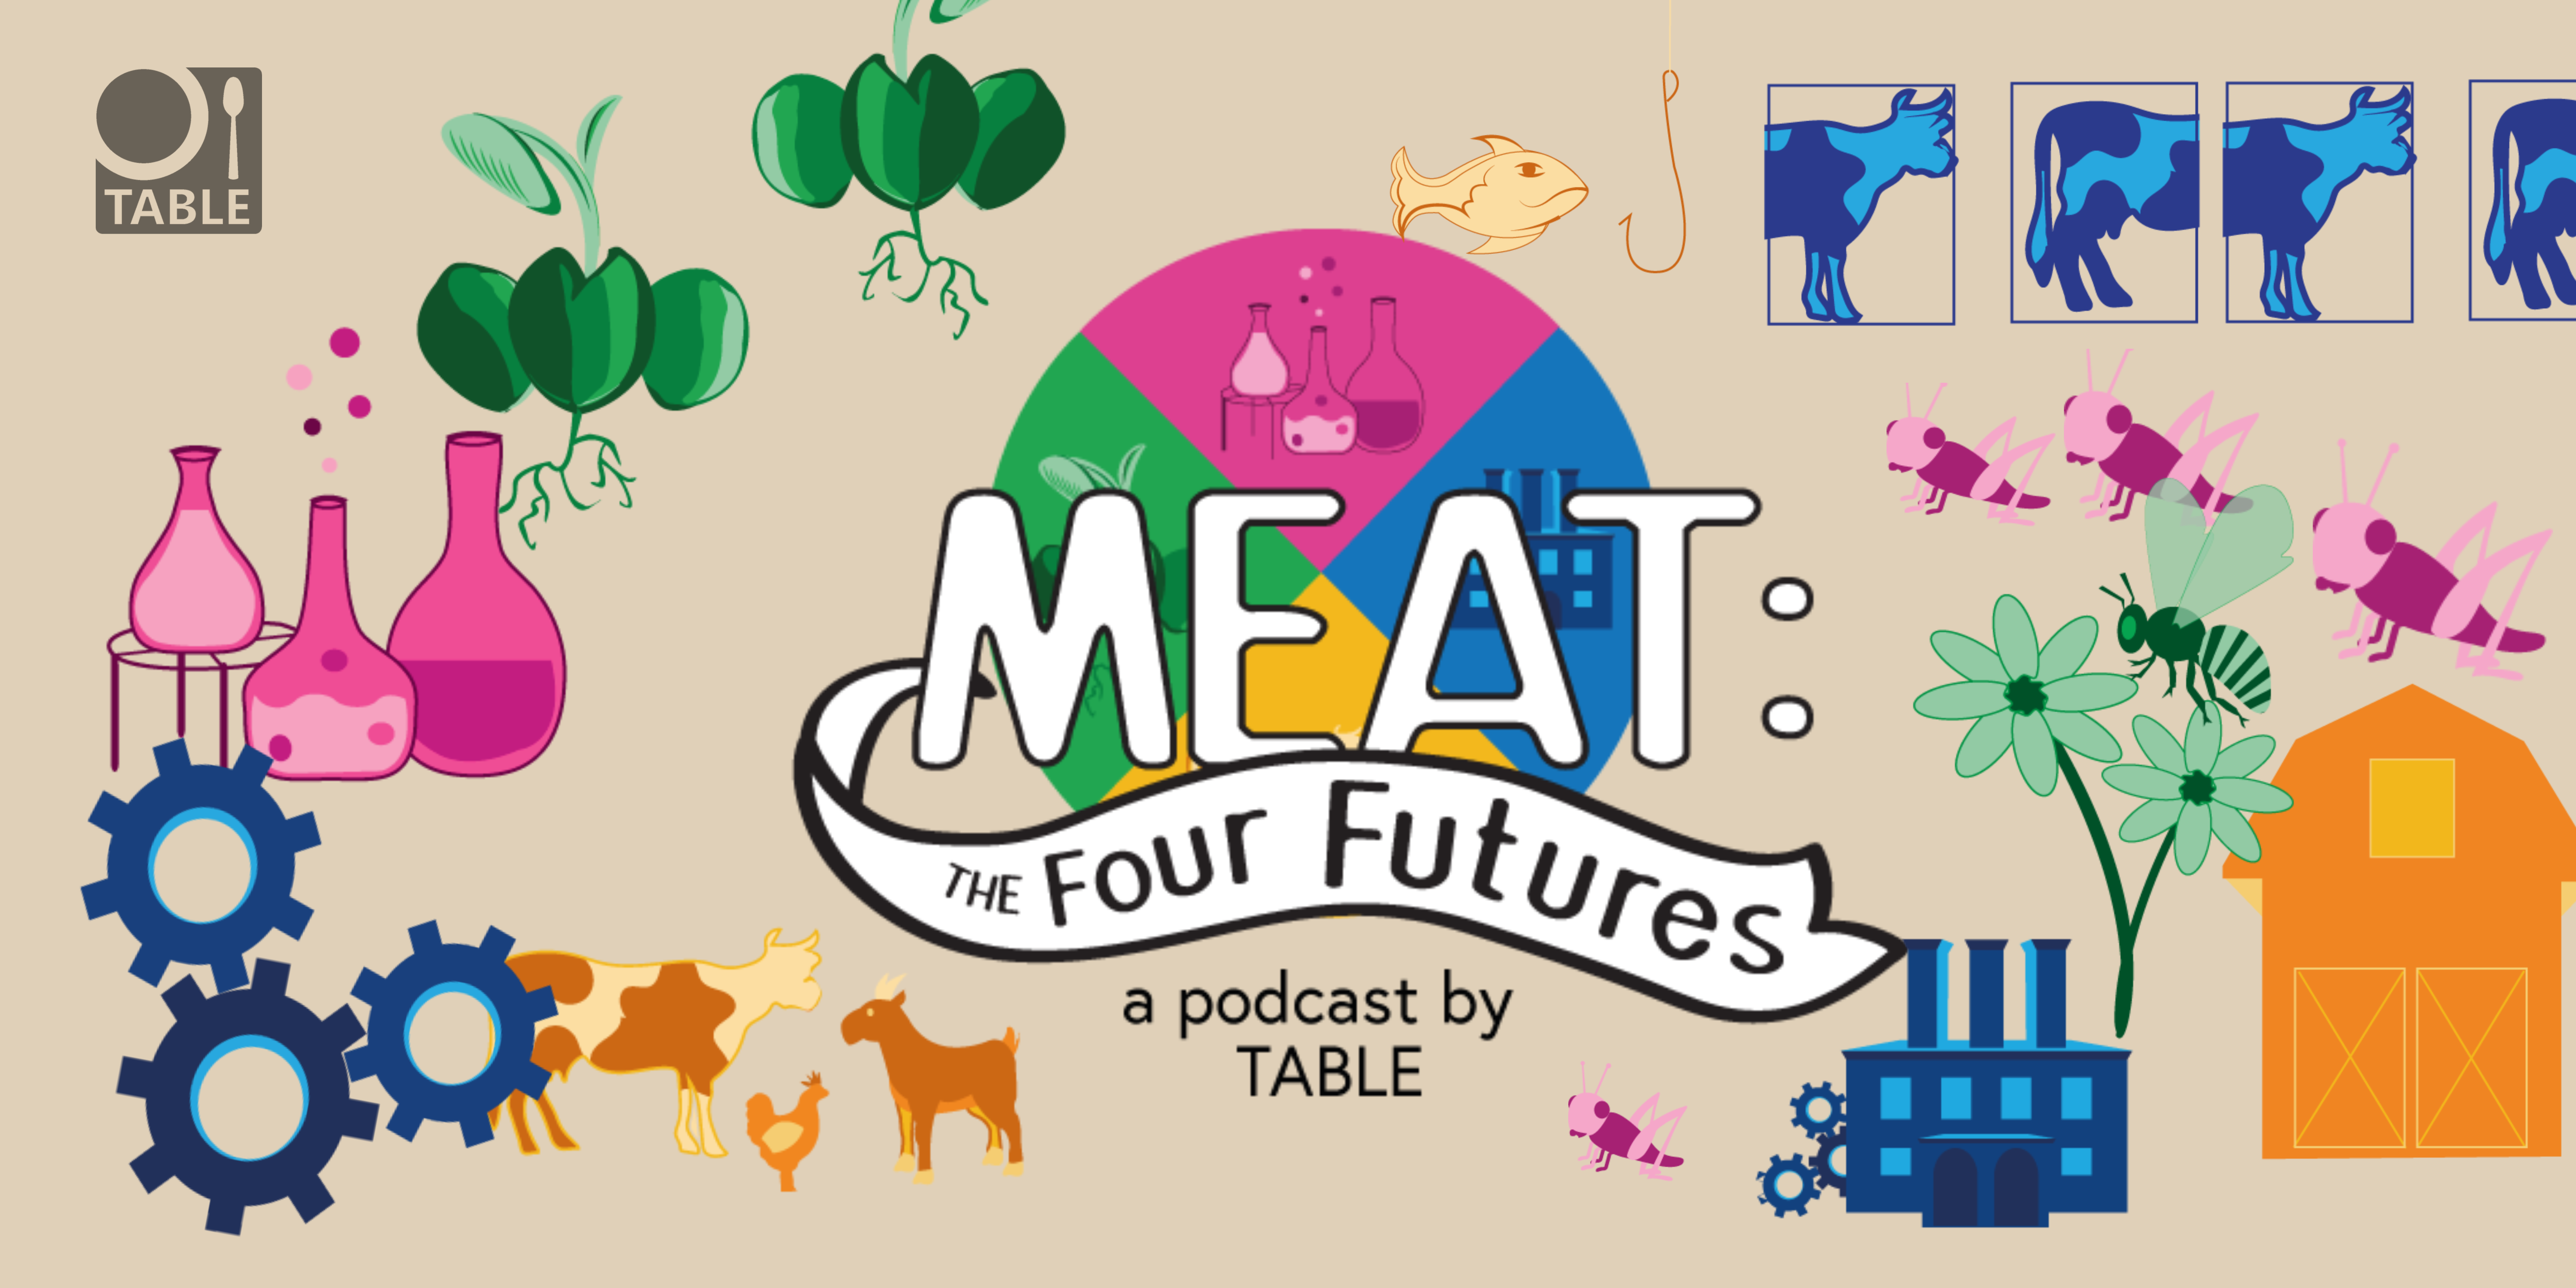 The banner advertising the Meat: The Four Futures podcast featuring brightly colored cartoon illustrations of the four futures and the TABLE logo